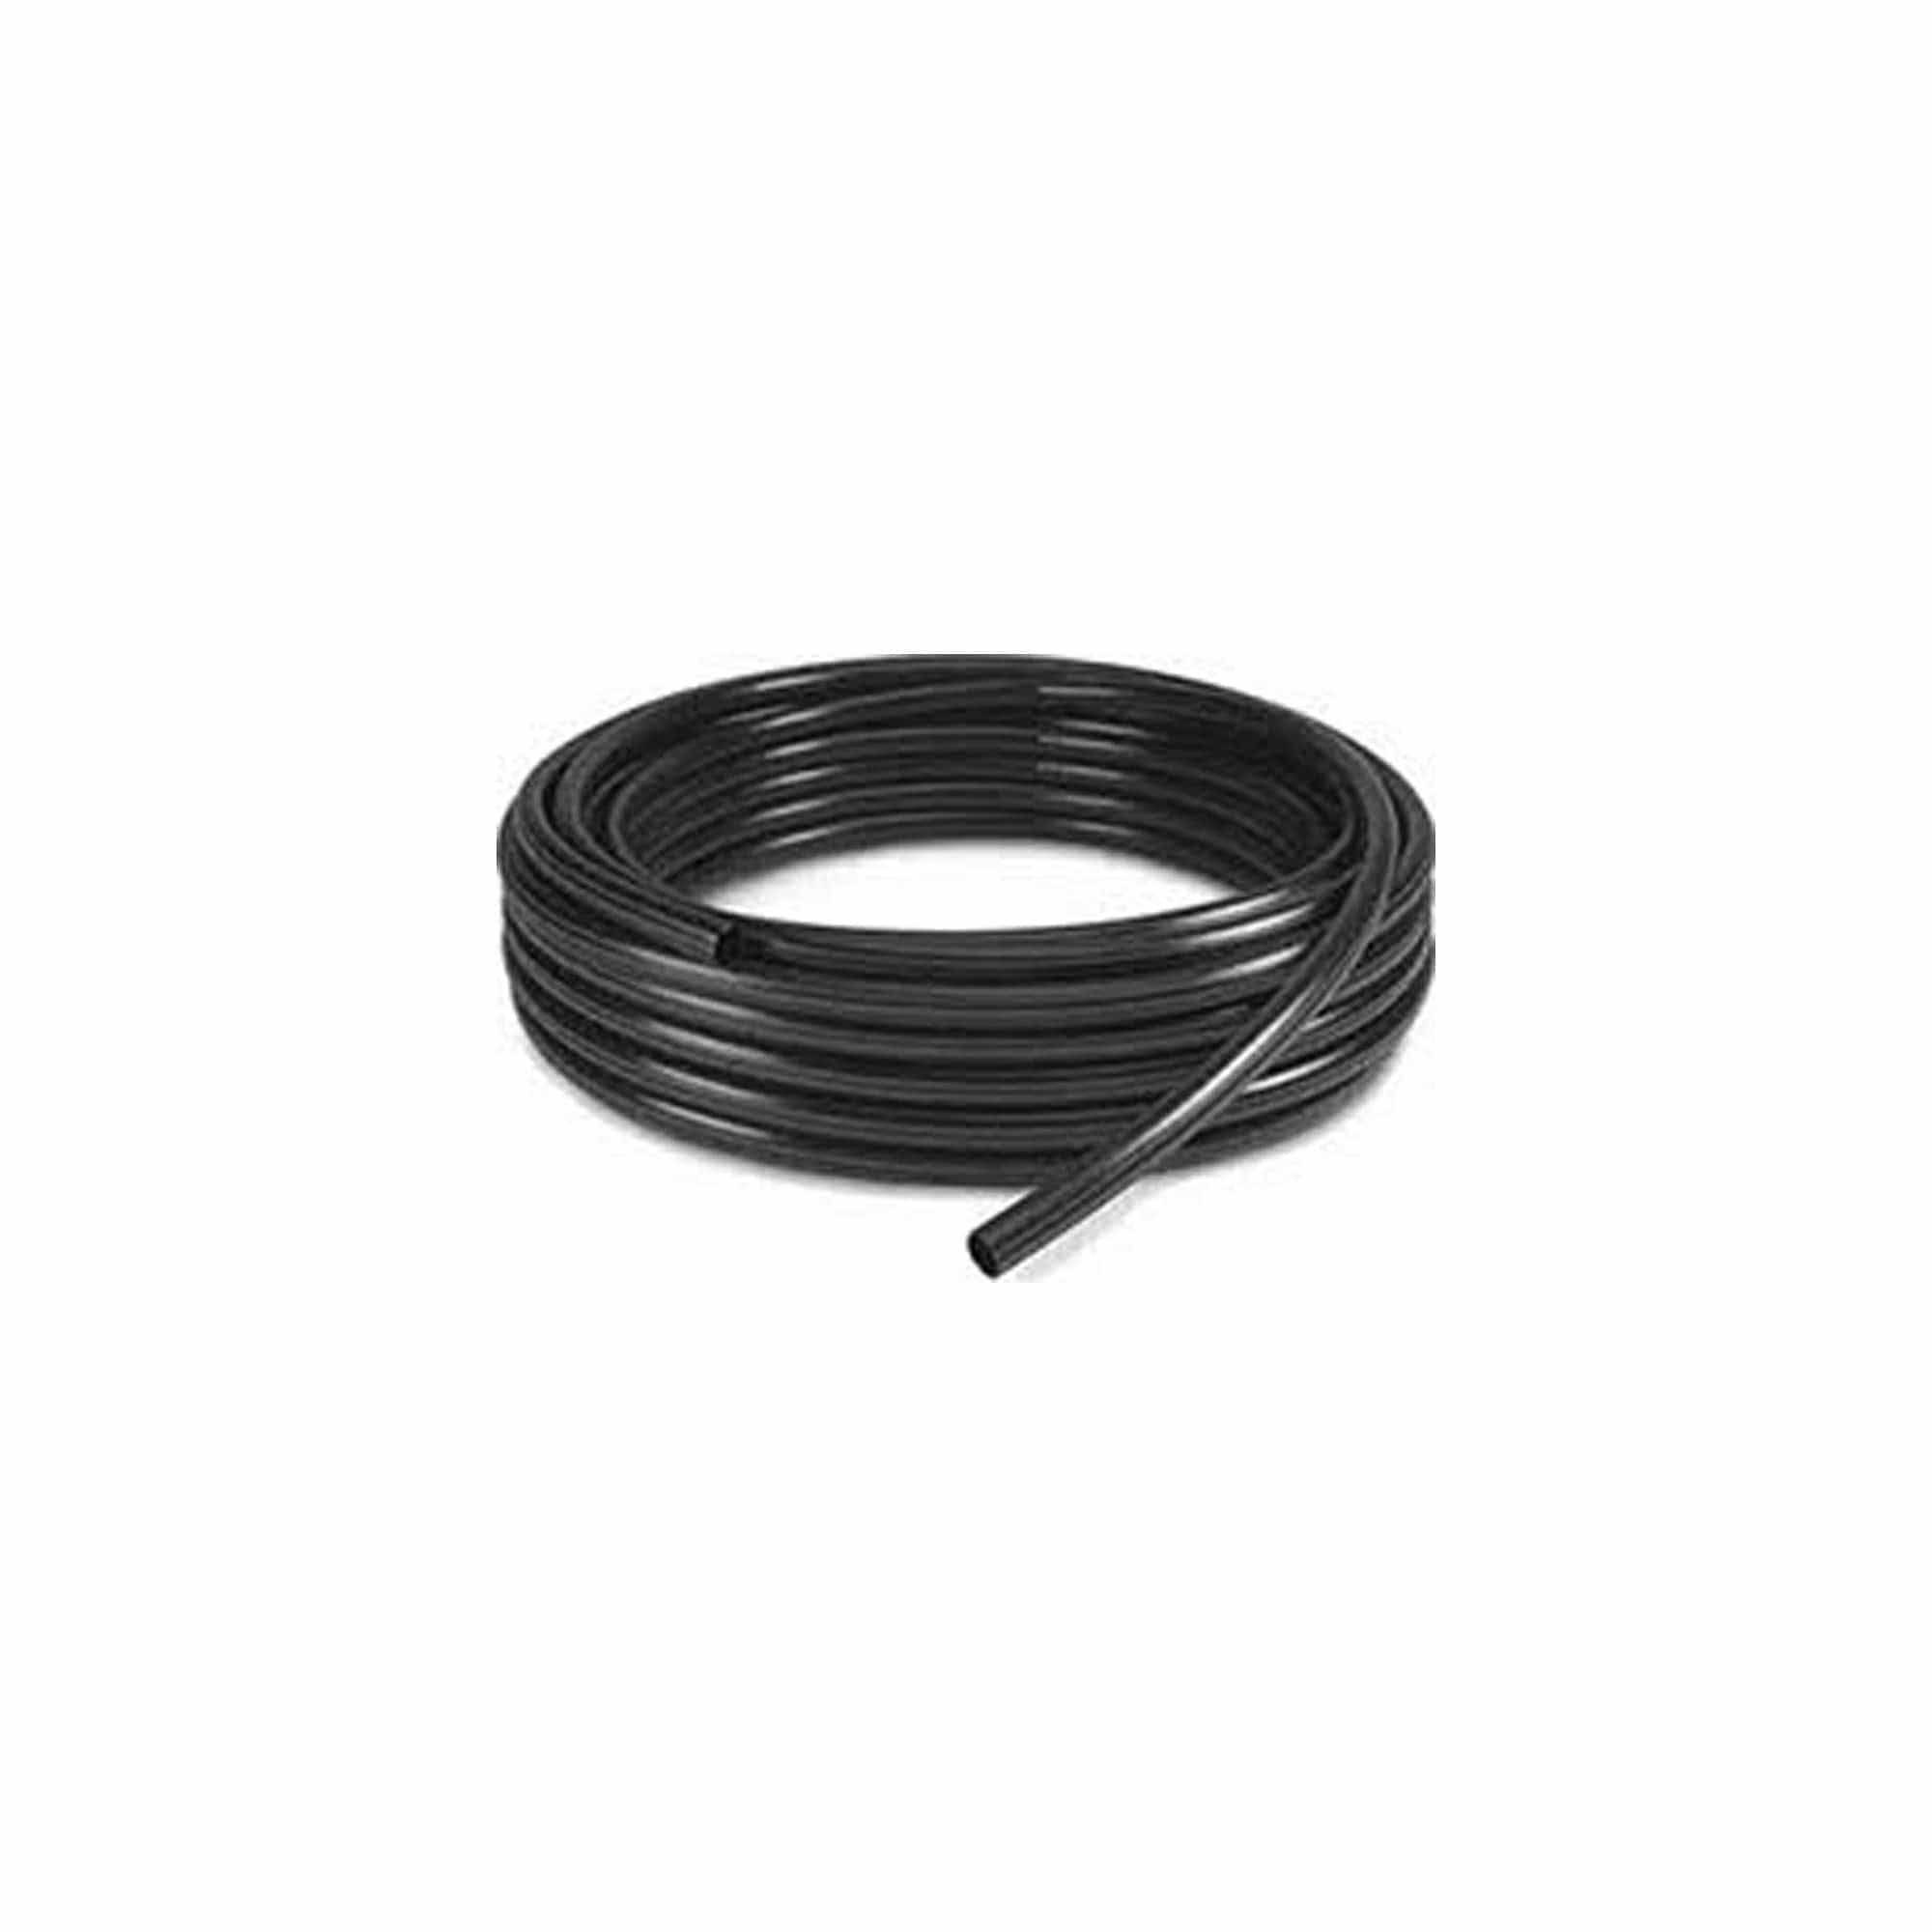 Dr Greenthumbs Flexible Tubing & Water Line (13mm / 19mm / 25mm)